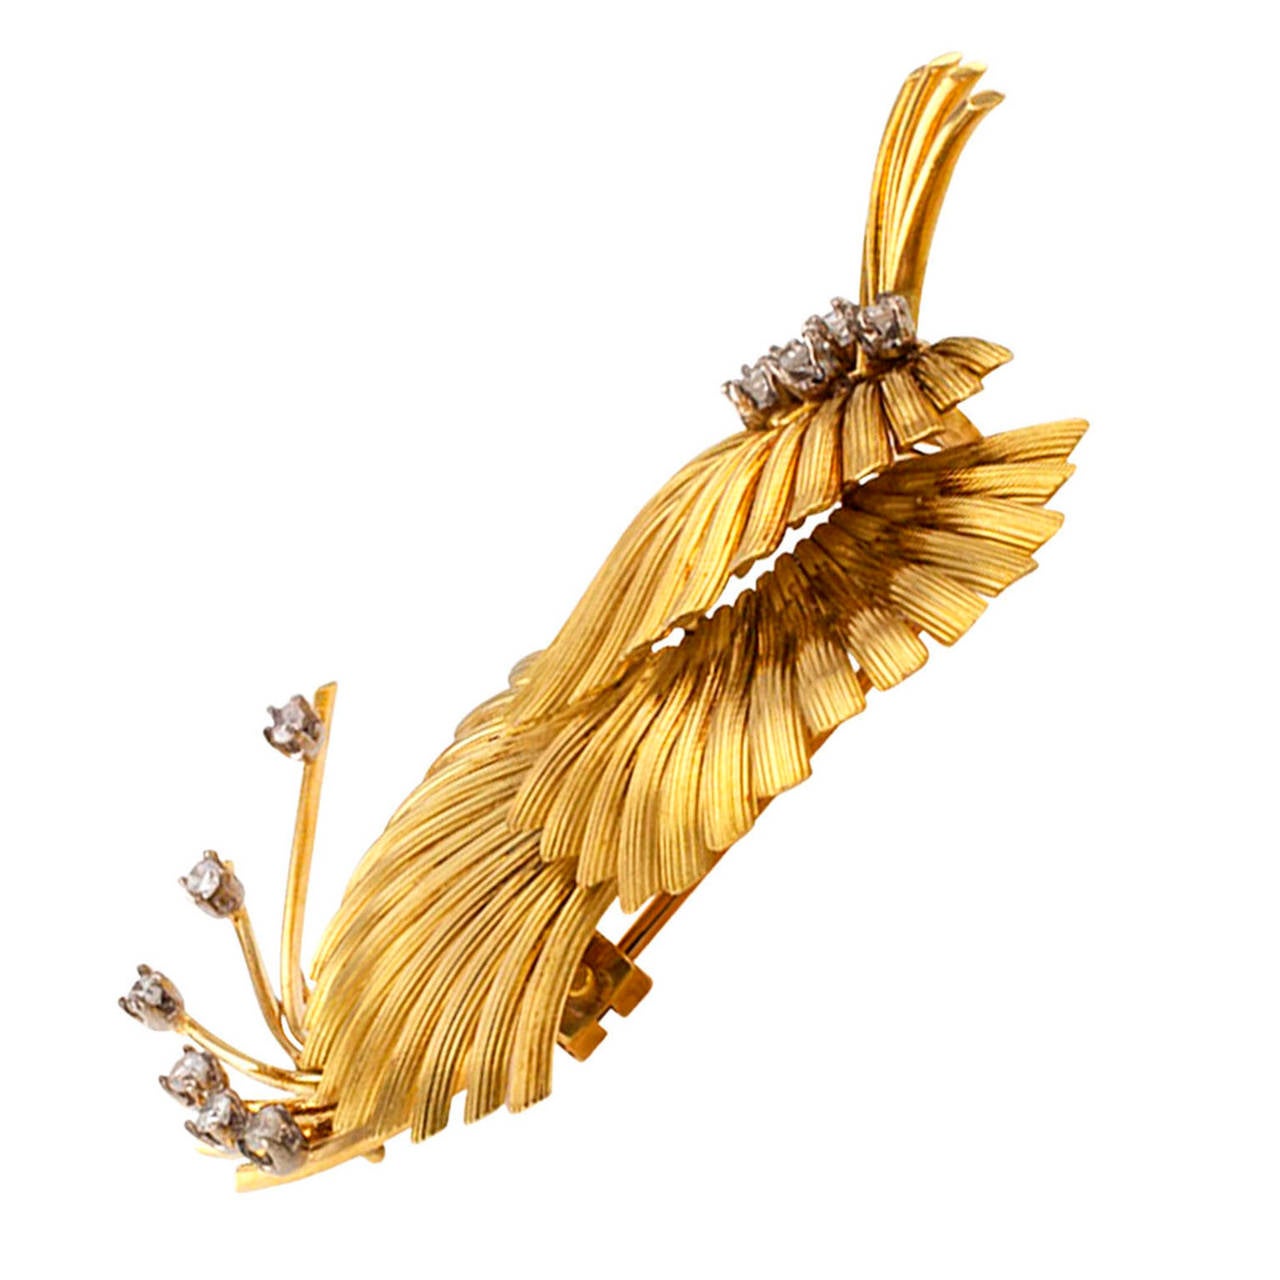 Handmade Gold and Diamond Brooch in 18 karat gold

Clip brooch, full of graceful motion, exotic looking.  It is a fantasy of energized fanning motifs and wire work sprays accented with round brilliant-cut diamonds totaling approximately 0.35 carat. 